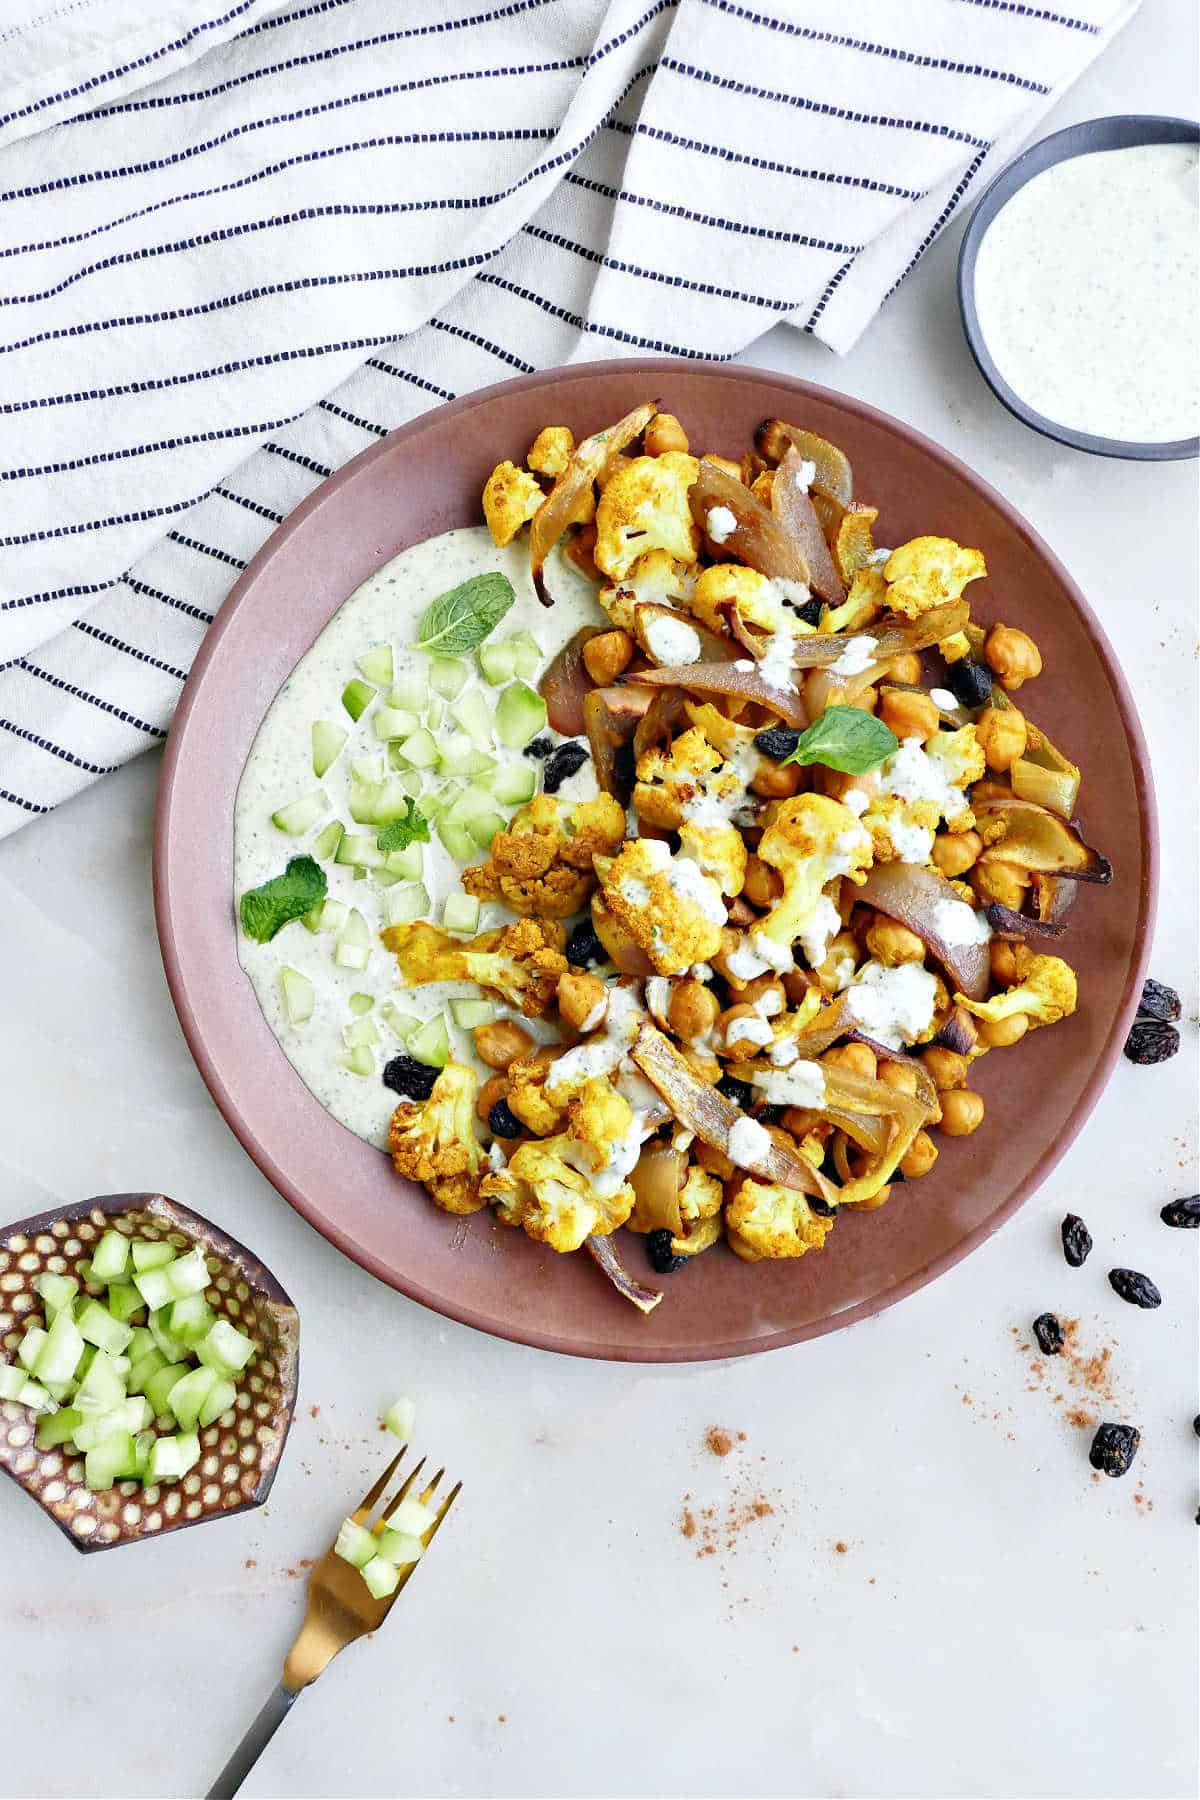 cauliflower, chickpeas, onions, and raisins paired with tahini sauce on a plate